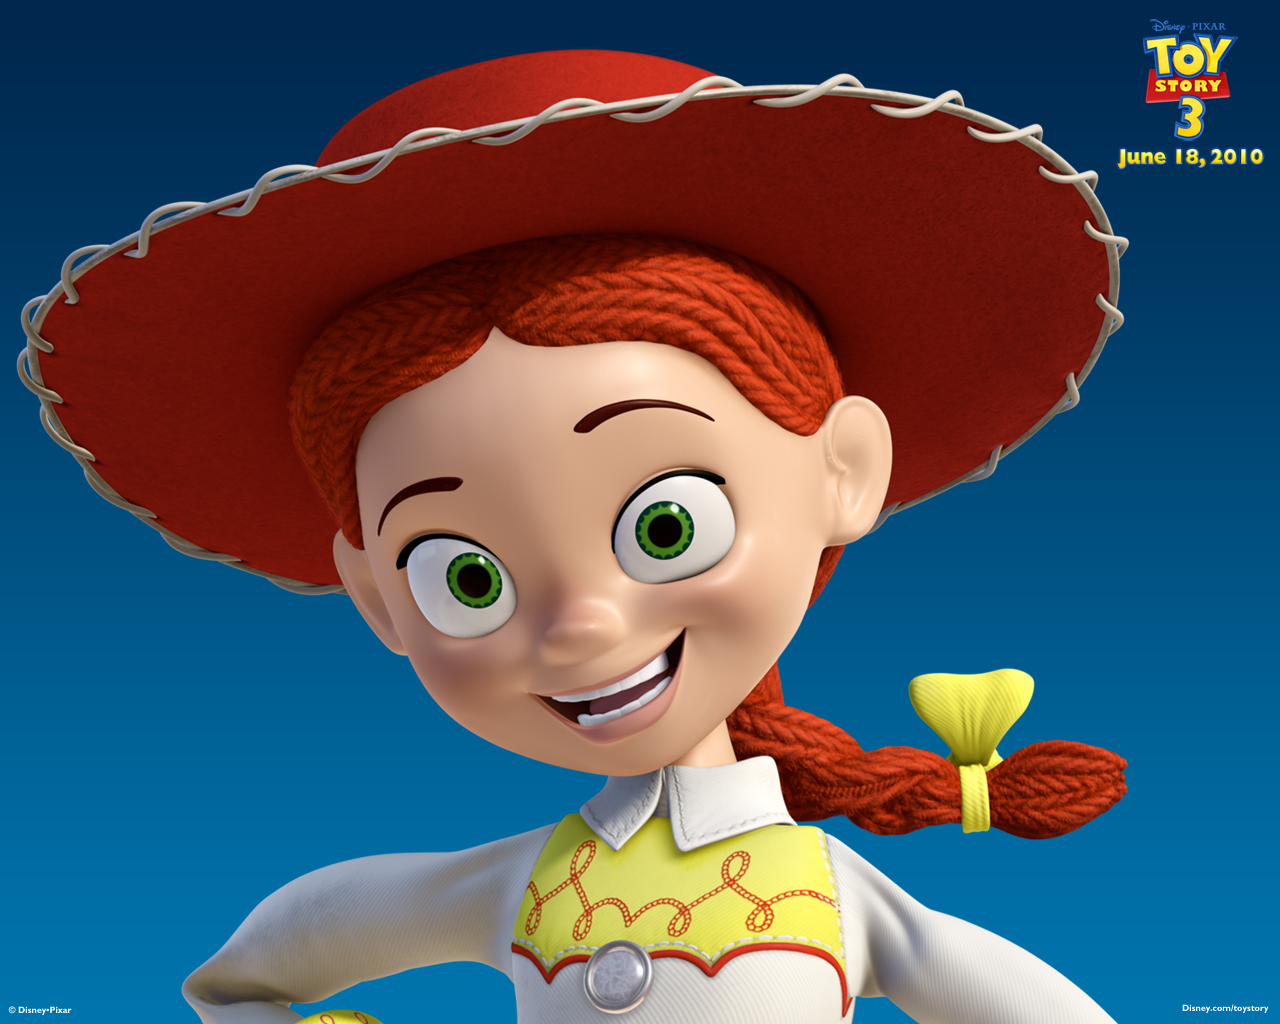 Toy Story 3 Wallpaper Number 3 1280 x 1024 Pixels